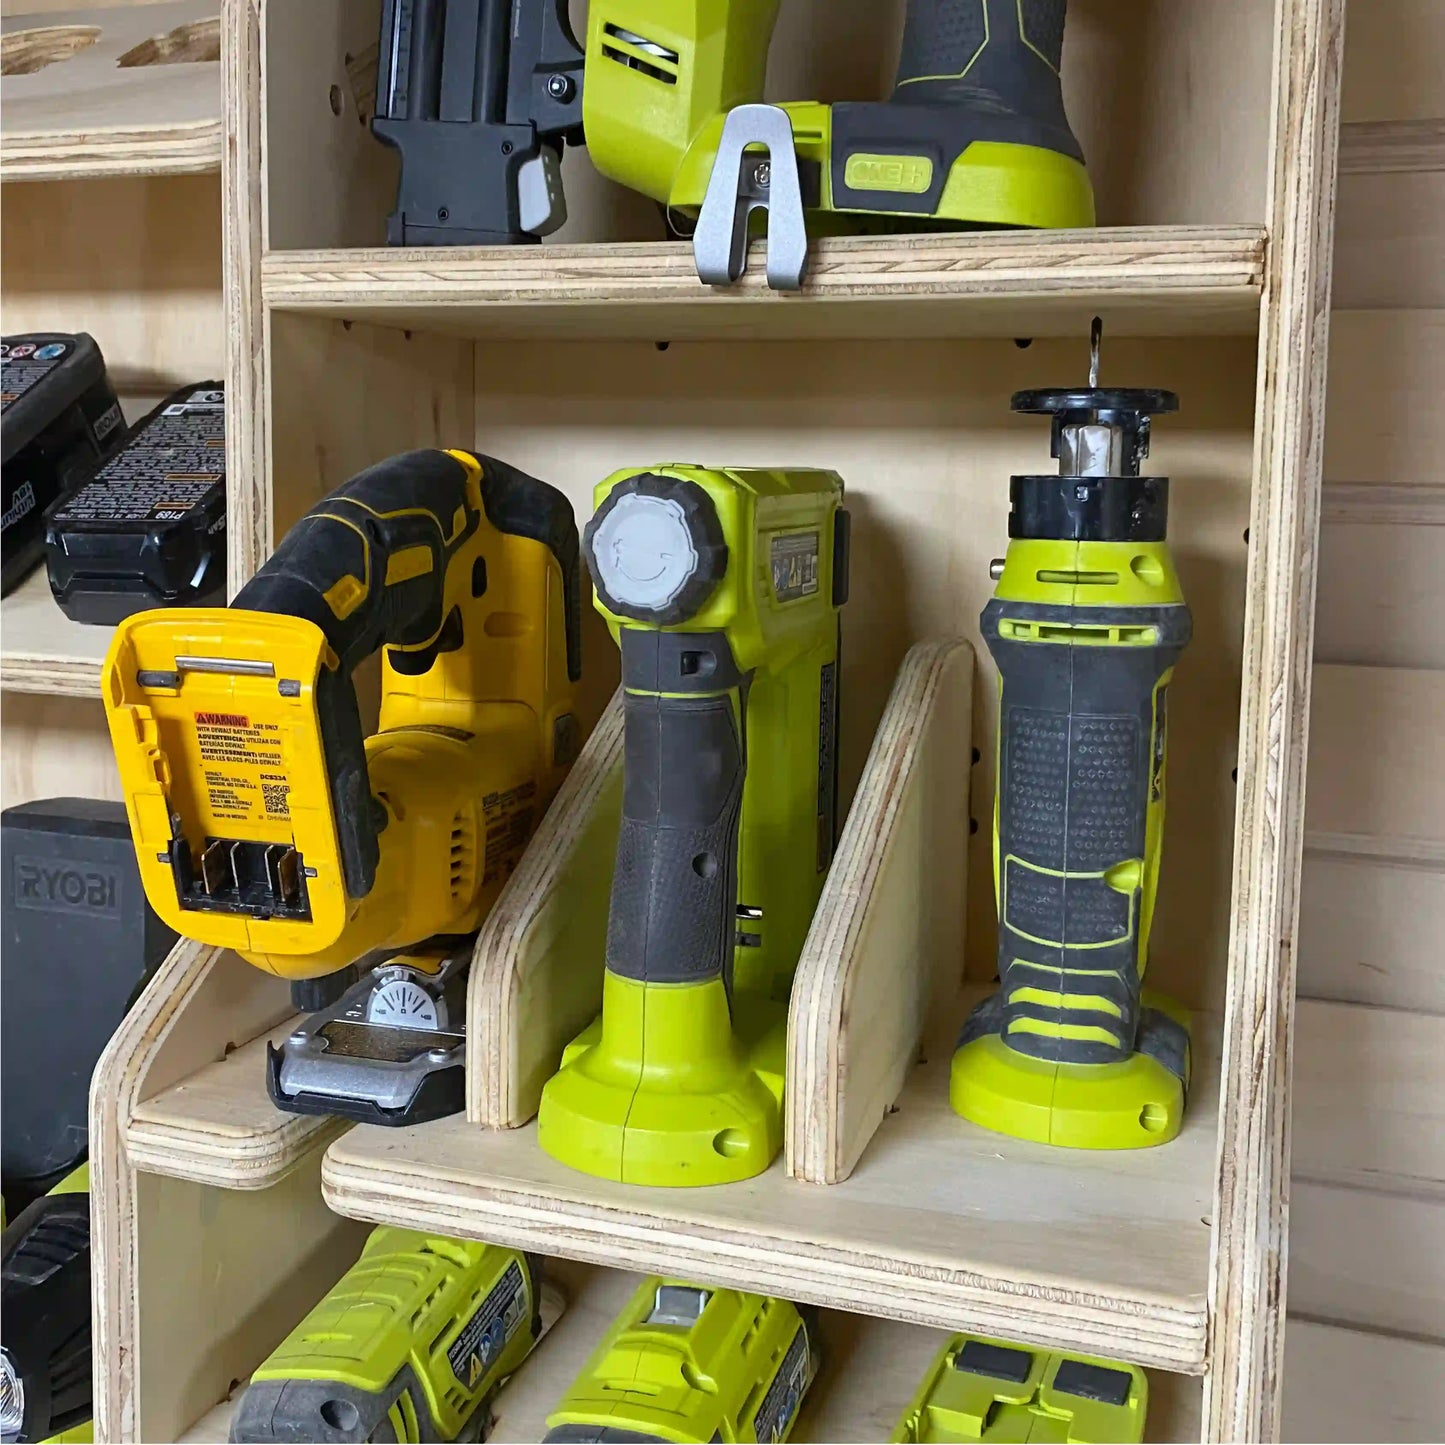 Ryobi Power Tool & Battery Charging Station CNC Router Files